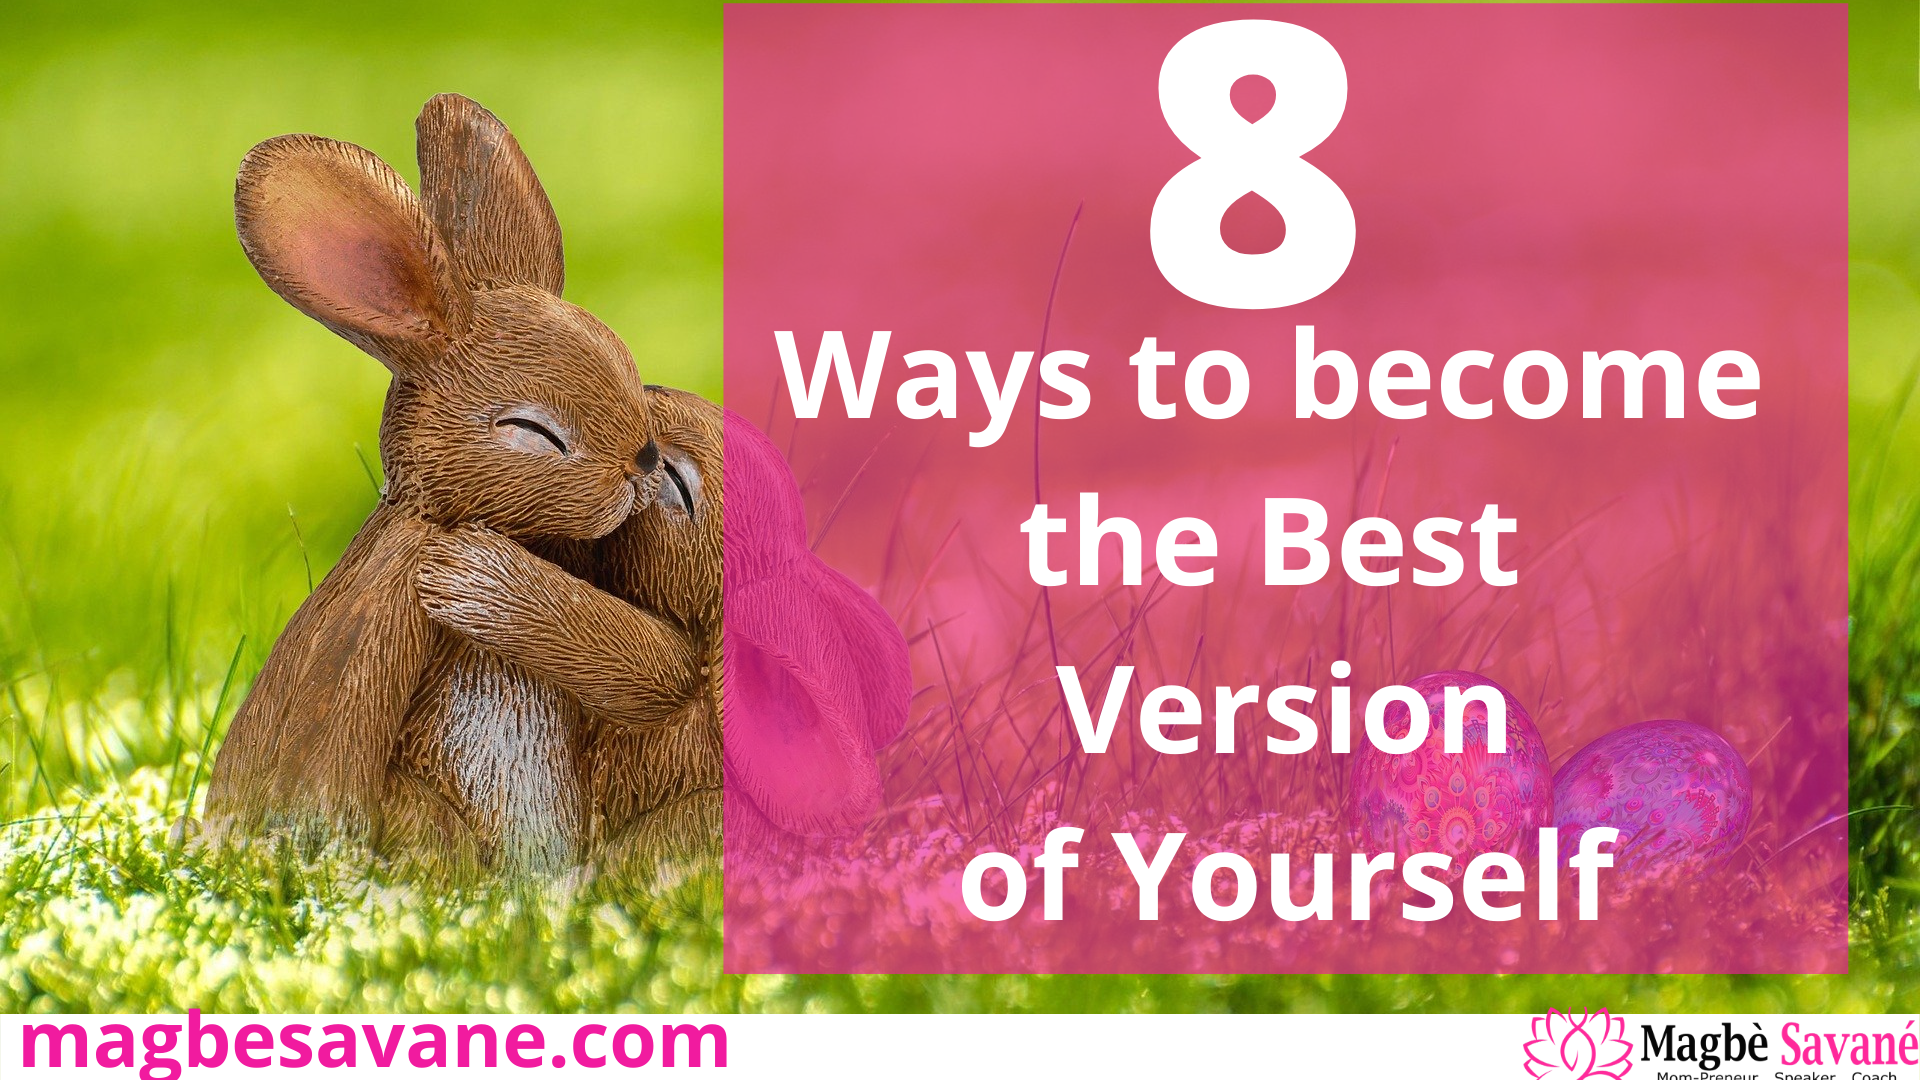 8 Ways to Become the Best Version of Yourself